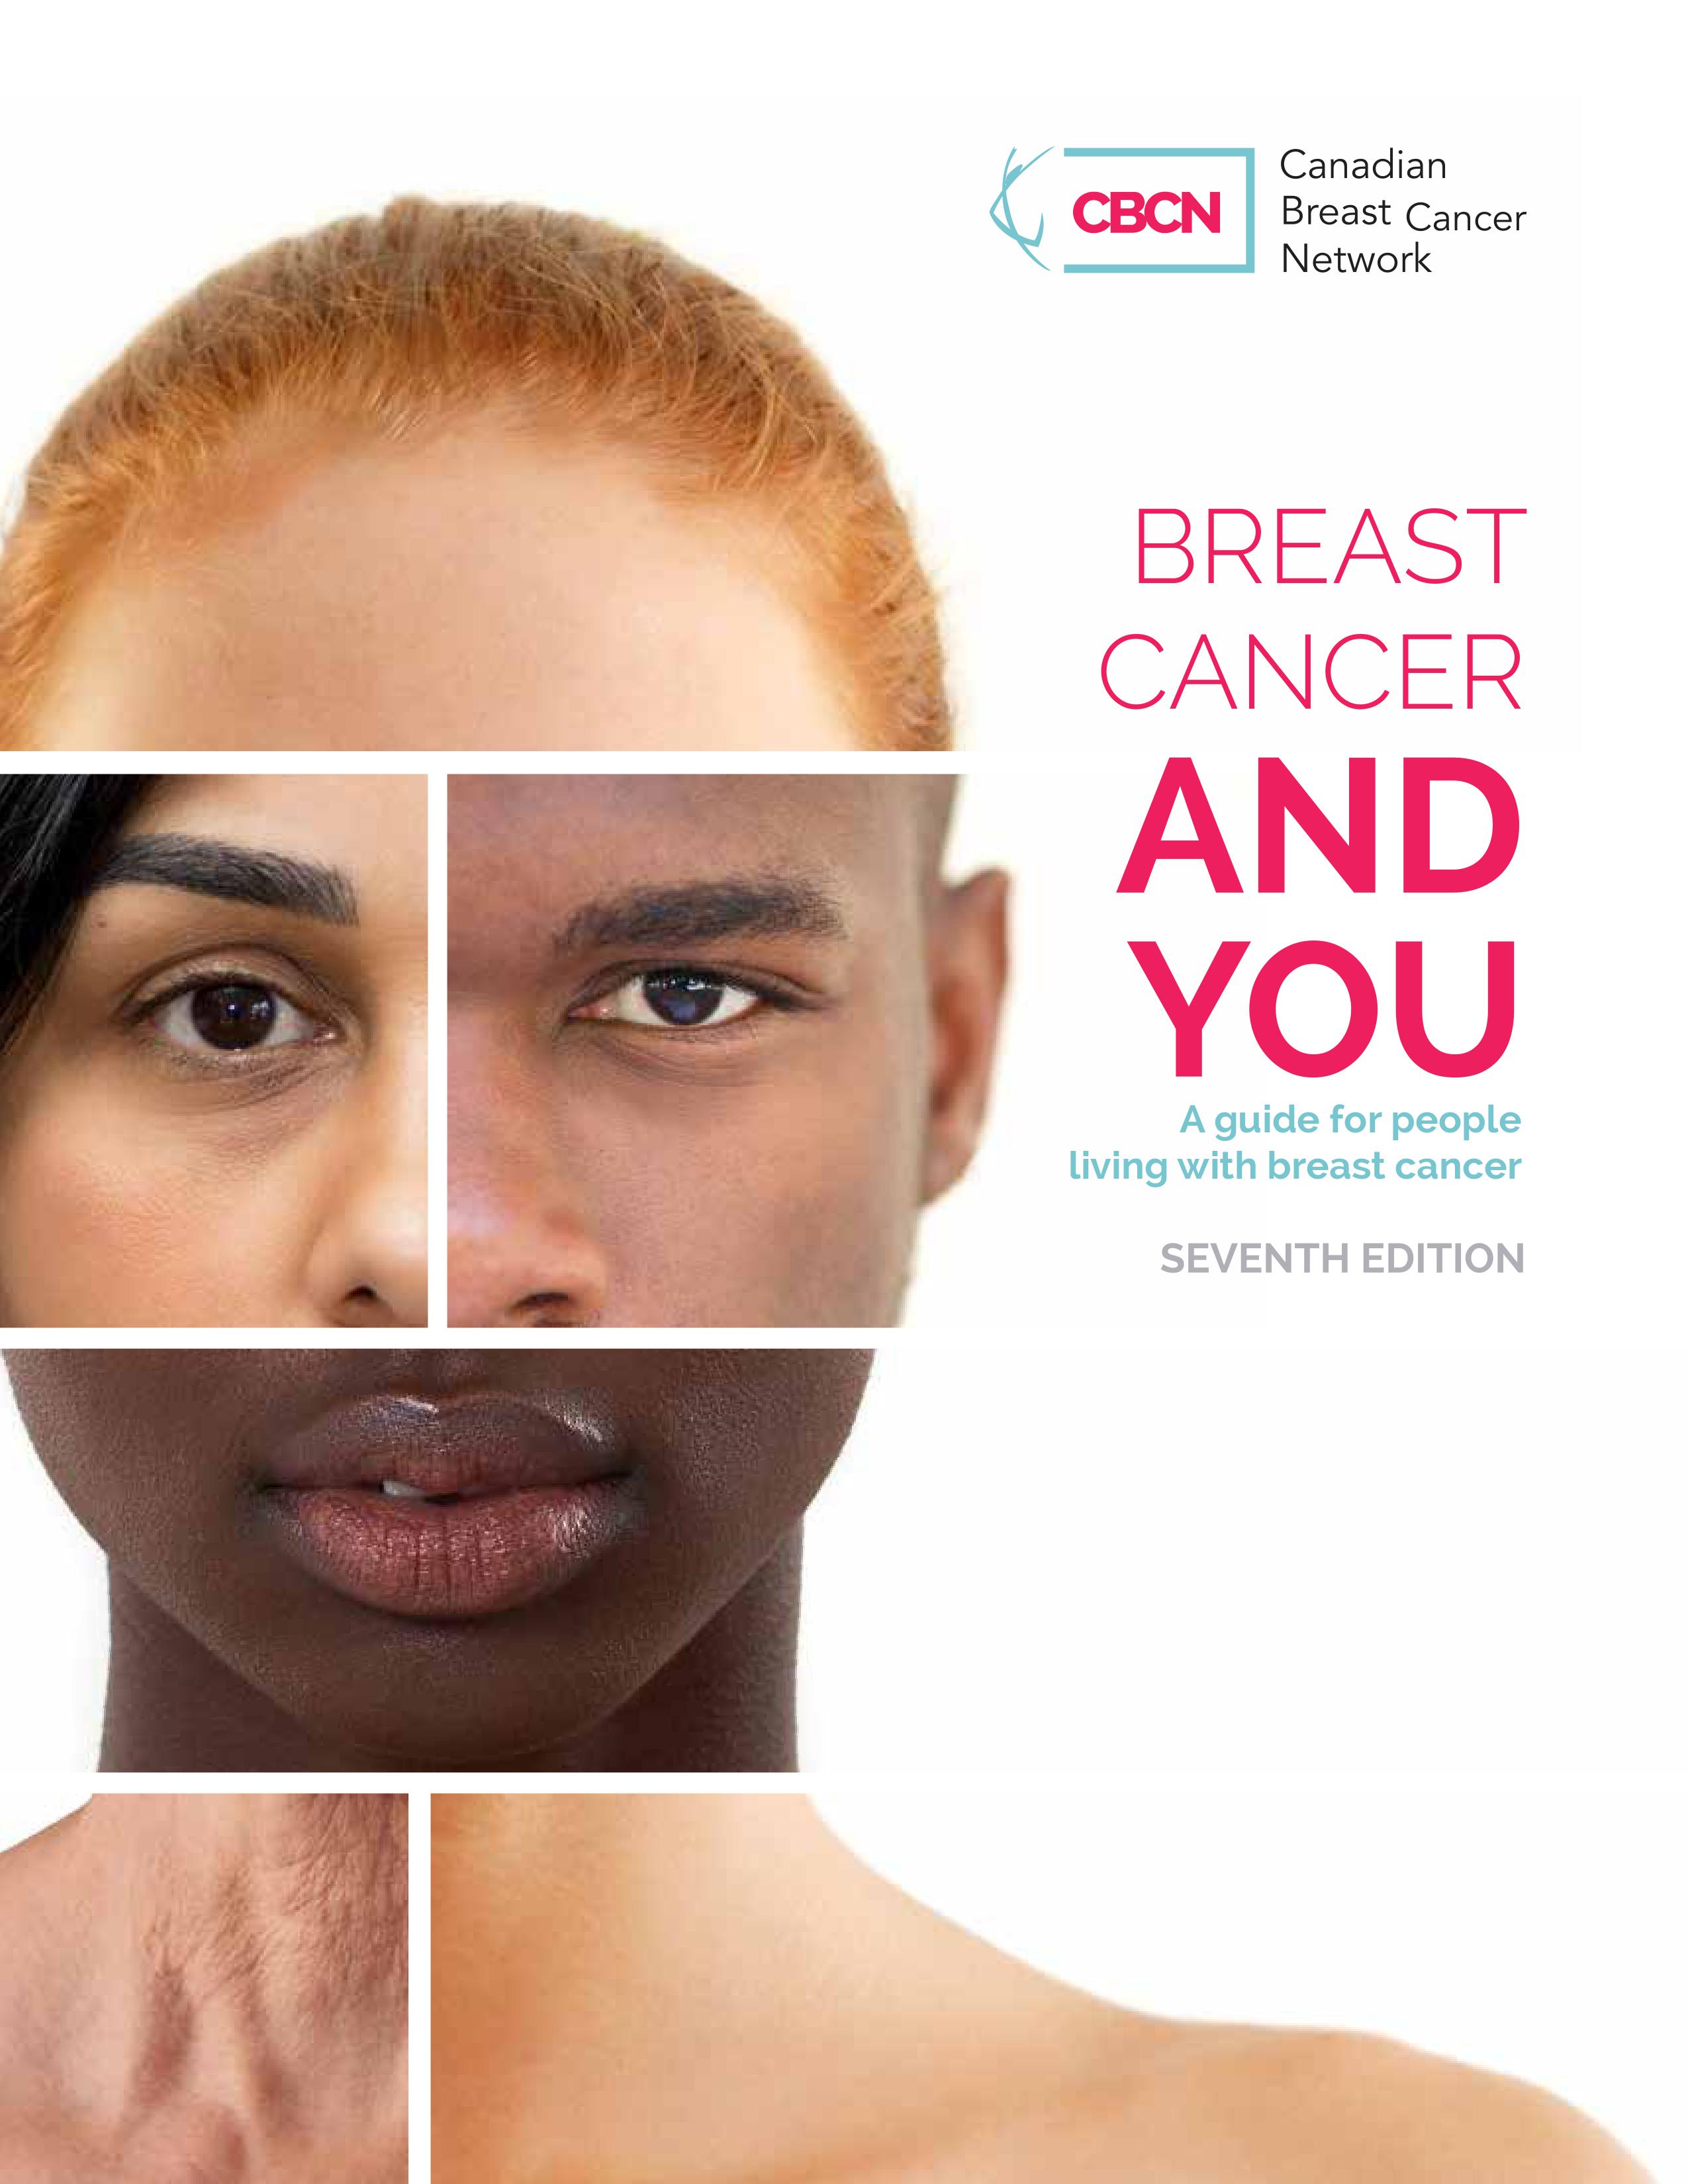 How breast cancer survivors can benefit from these high-tech